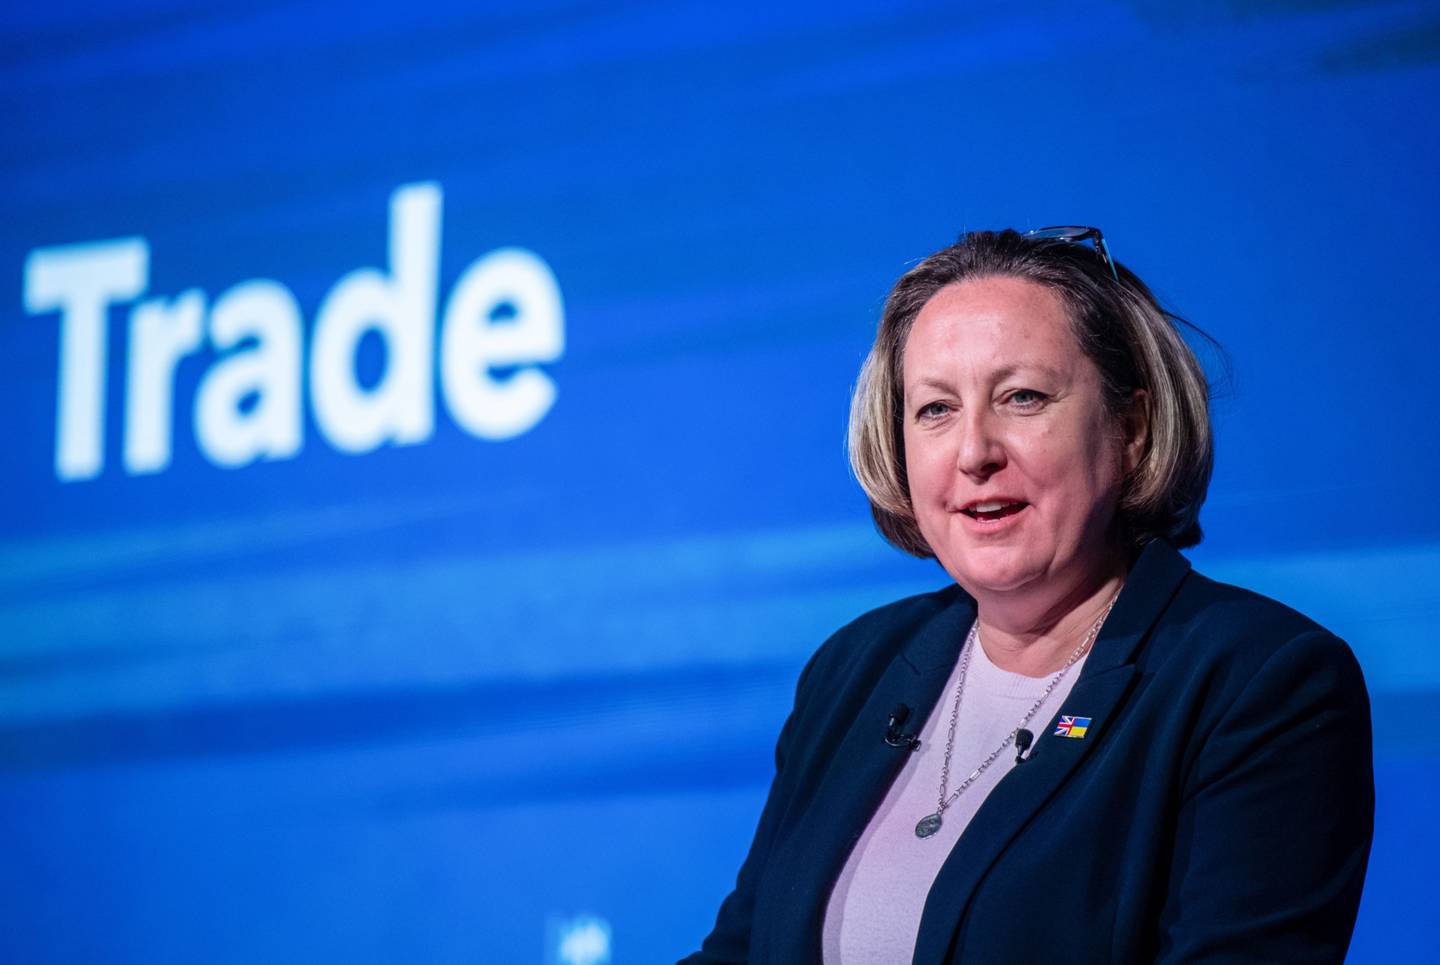 Anne-Marie Trevelyan, UK trade secretary, delivering a speech in London in May. Bloomberg